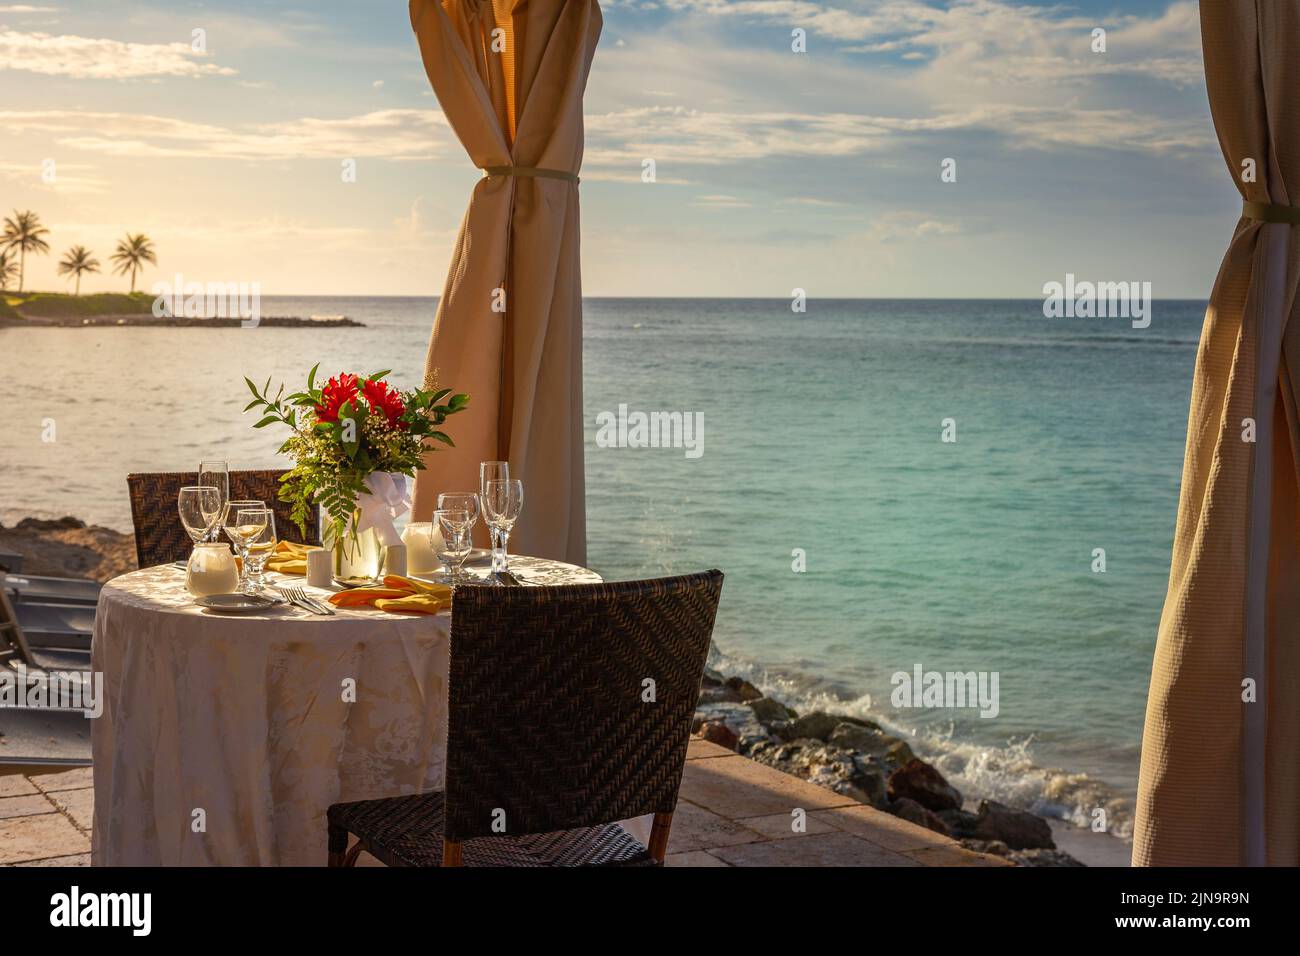 Romantic table for two and Beach with gazebo at sunset, Montego Bay, Jamaica Stock Photo